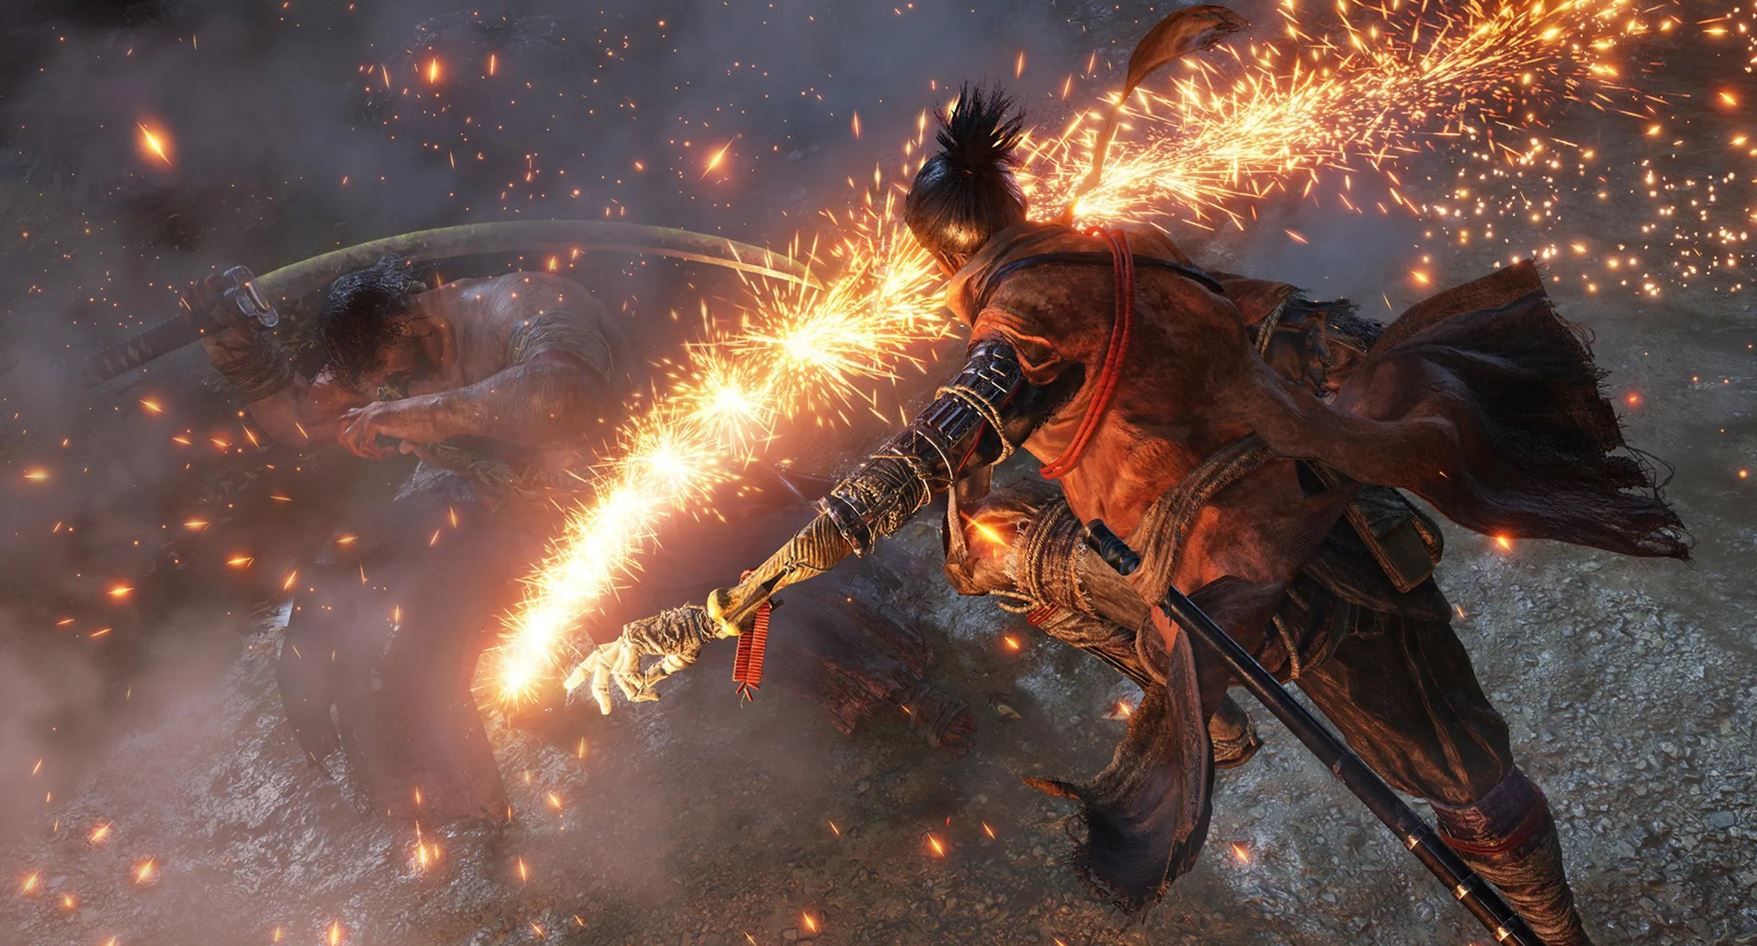 Sekiro, Easy Modes, and Accessibility